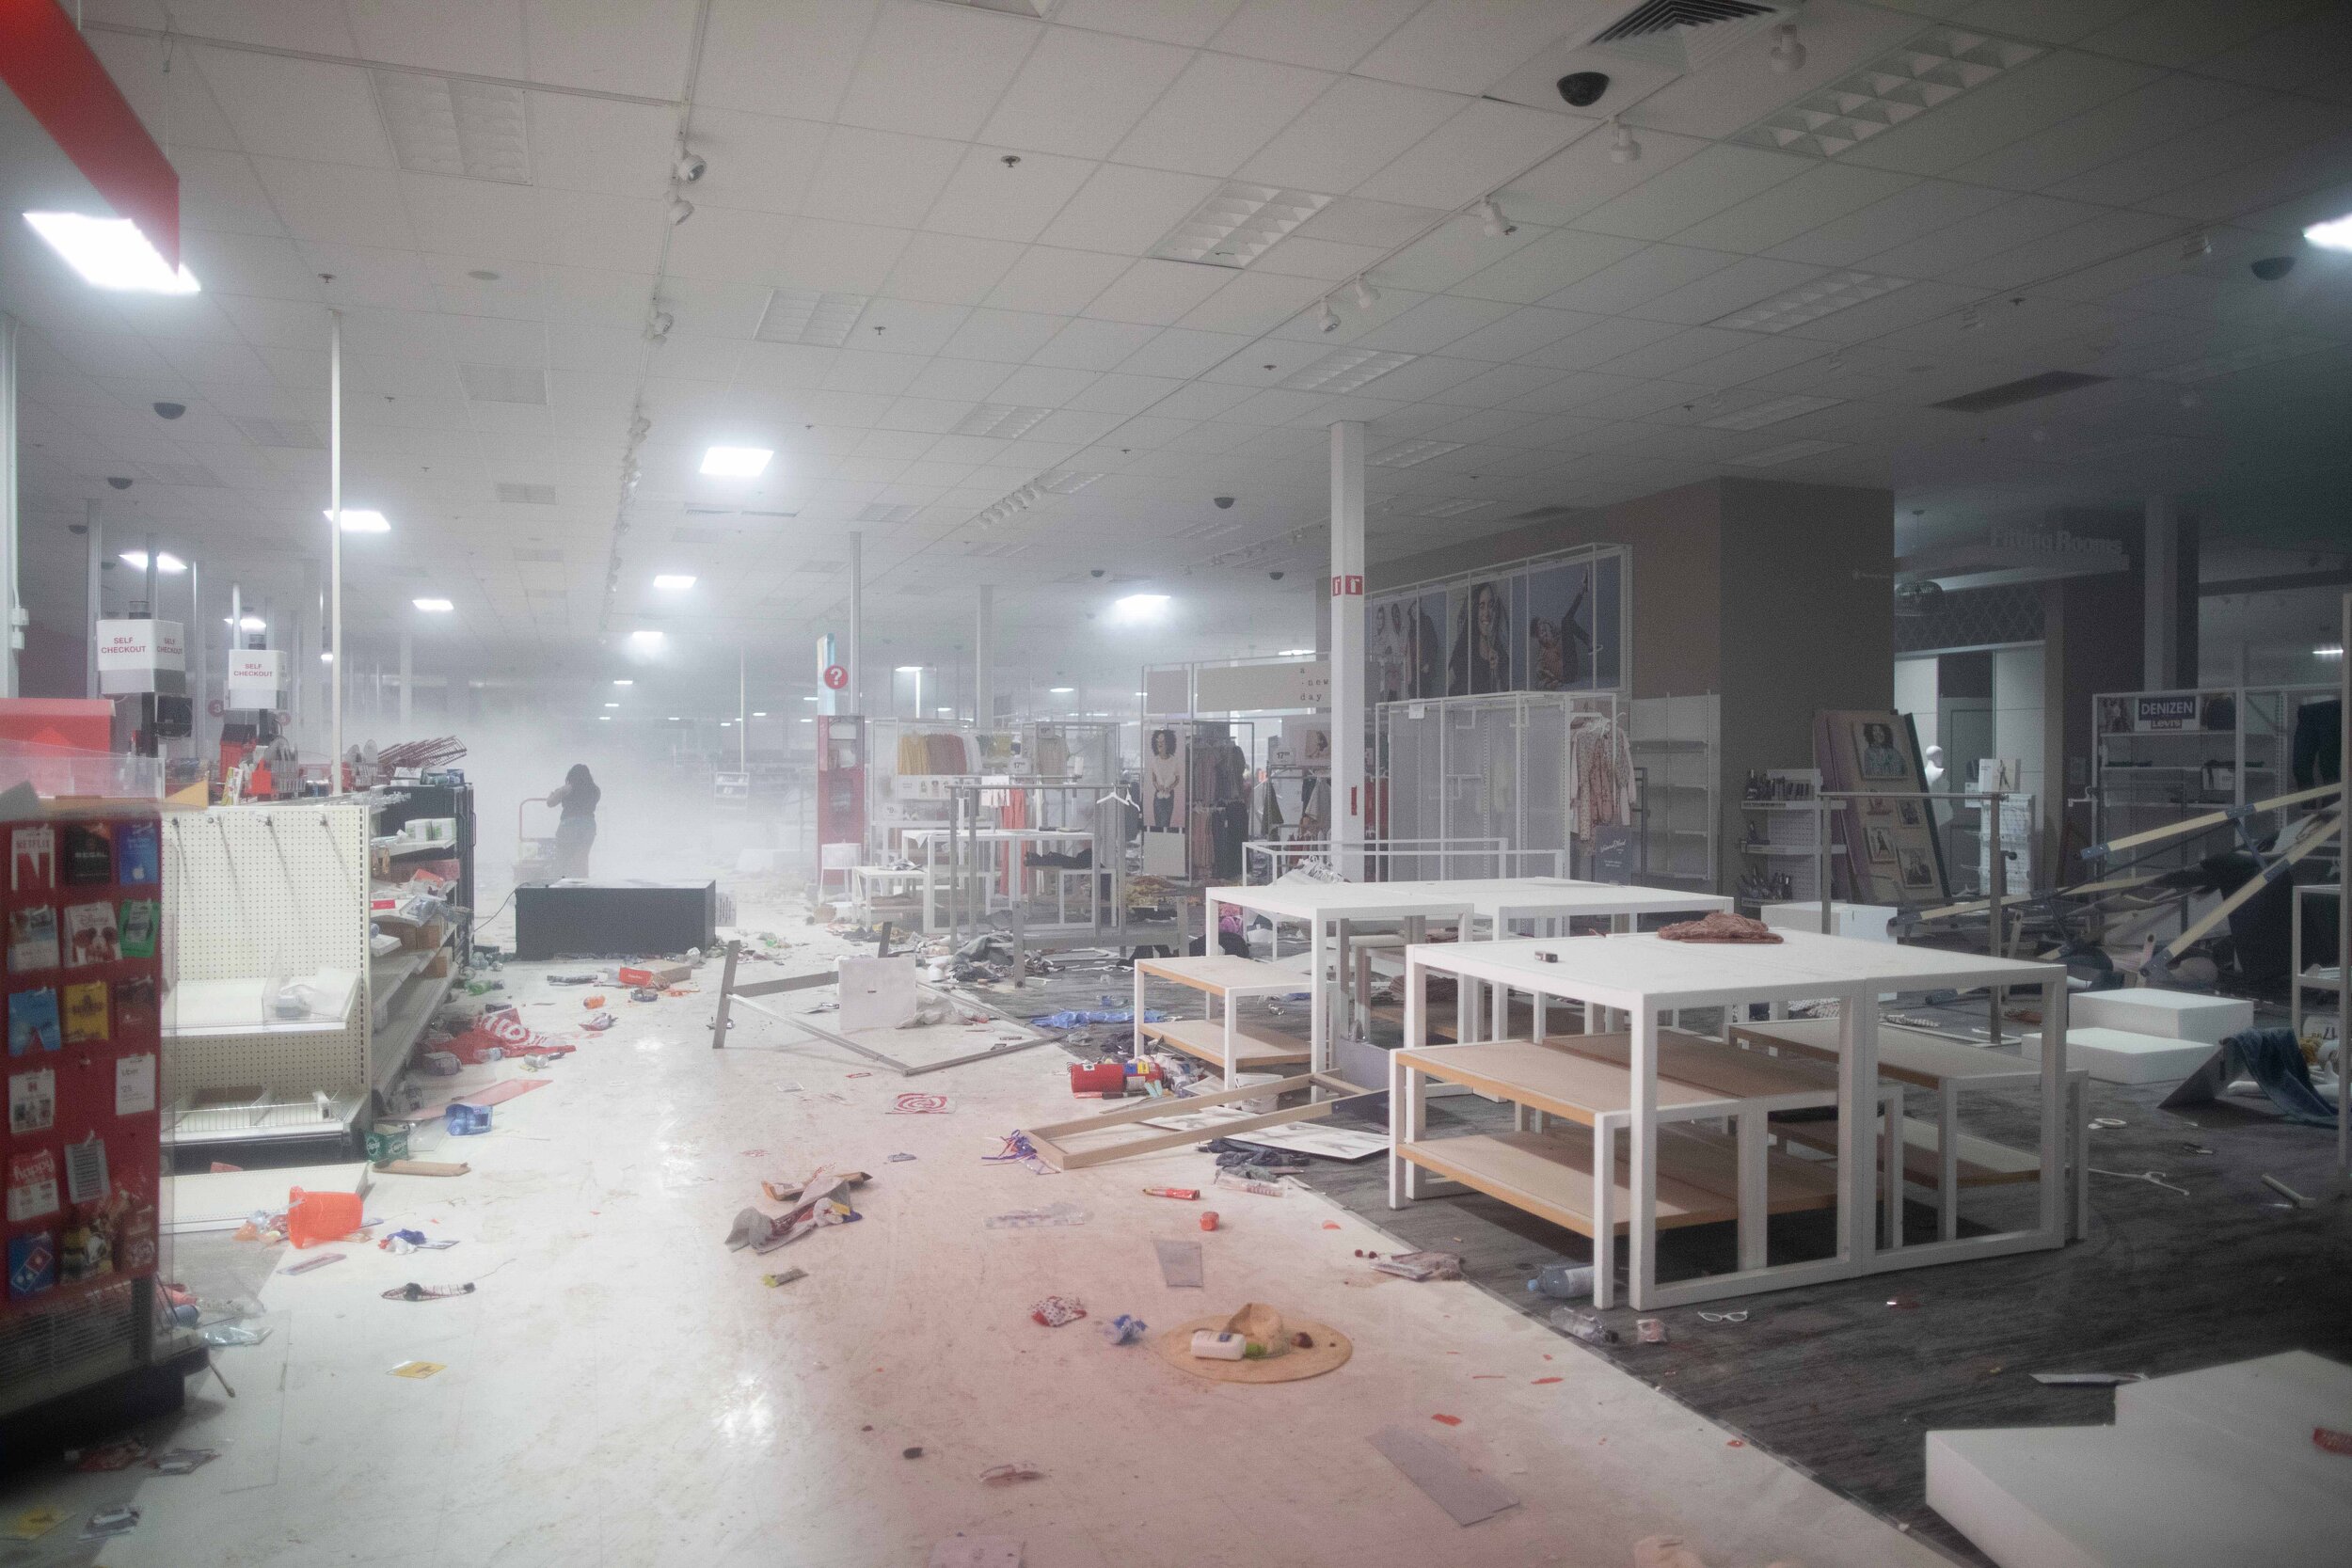  Remnants of tear gas still fills the air as looters clear out a Target store in Minneapolis, Minnesota. Protests turned into riots with looting of businesses overnight over the police killing of George Floyd on May 27. 